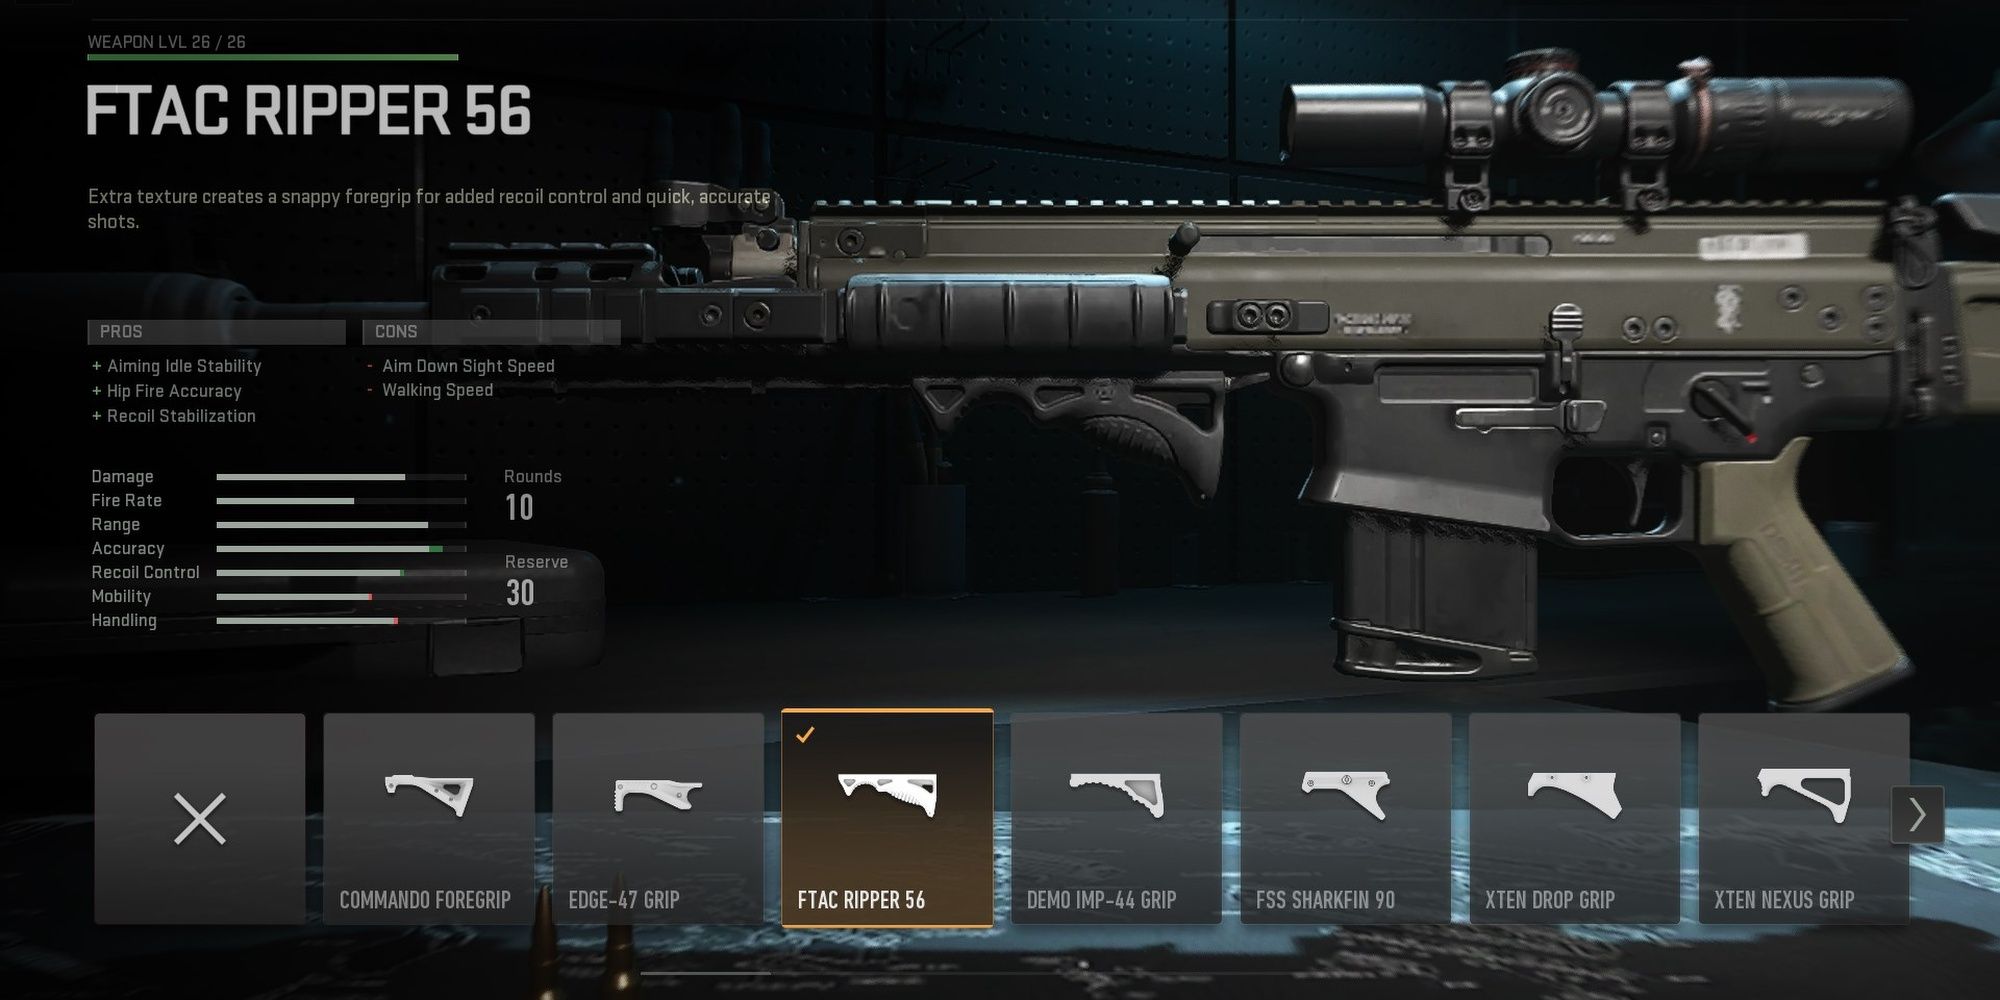 EDGE-47 Grip  Underbarrel in Warzone, MW3 and MW2 - How To Get